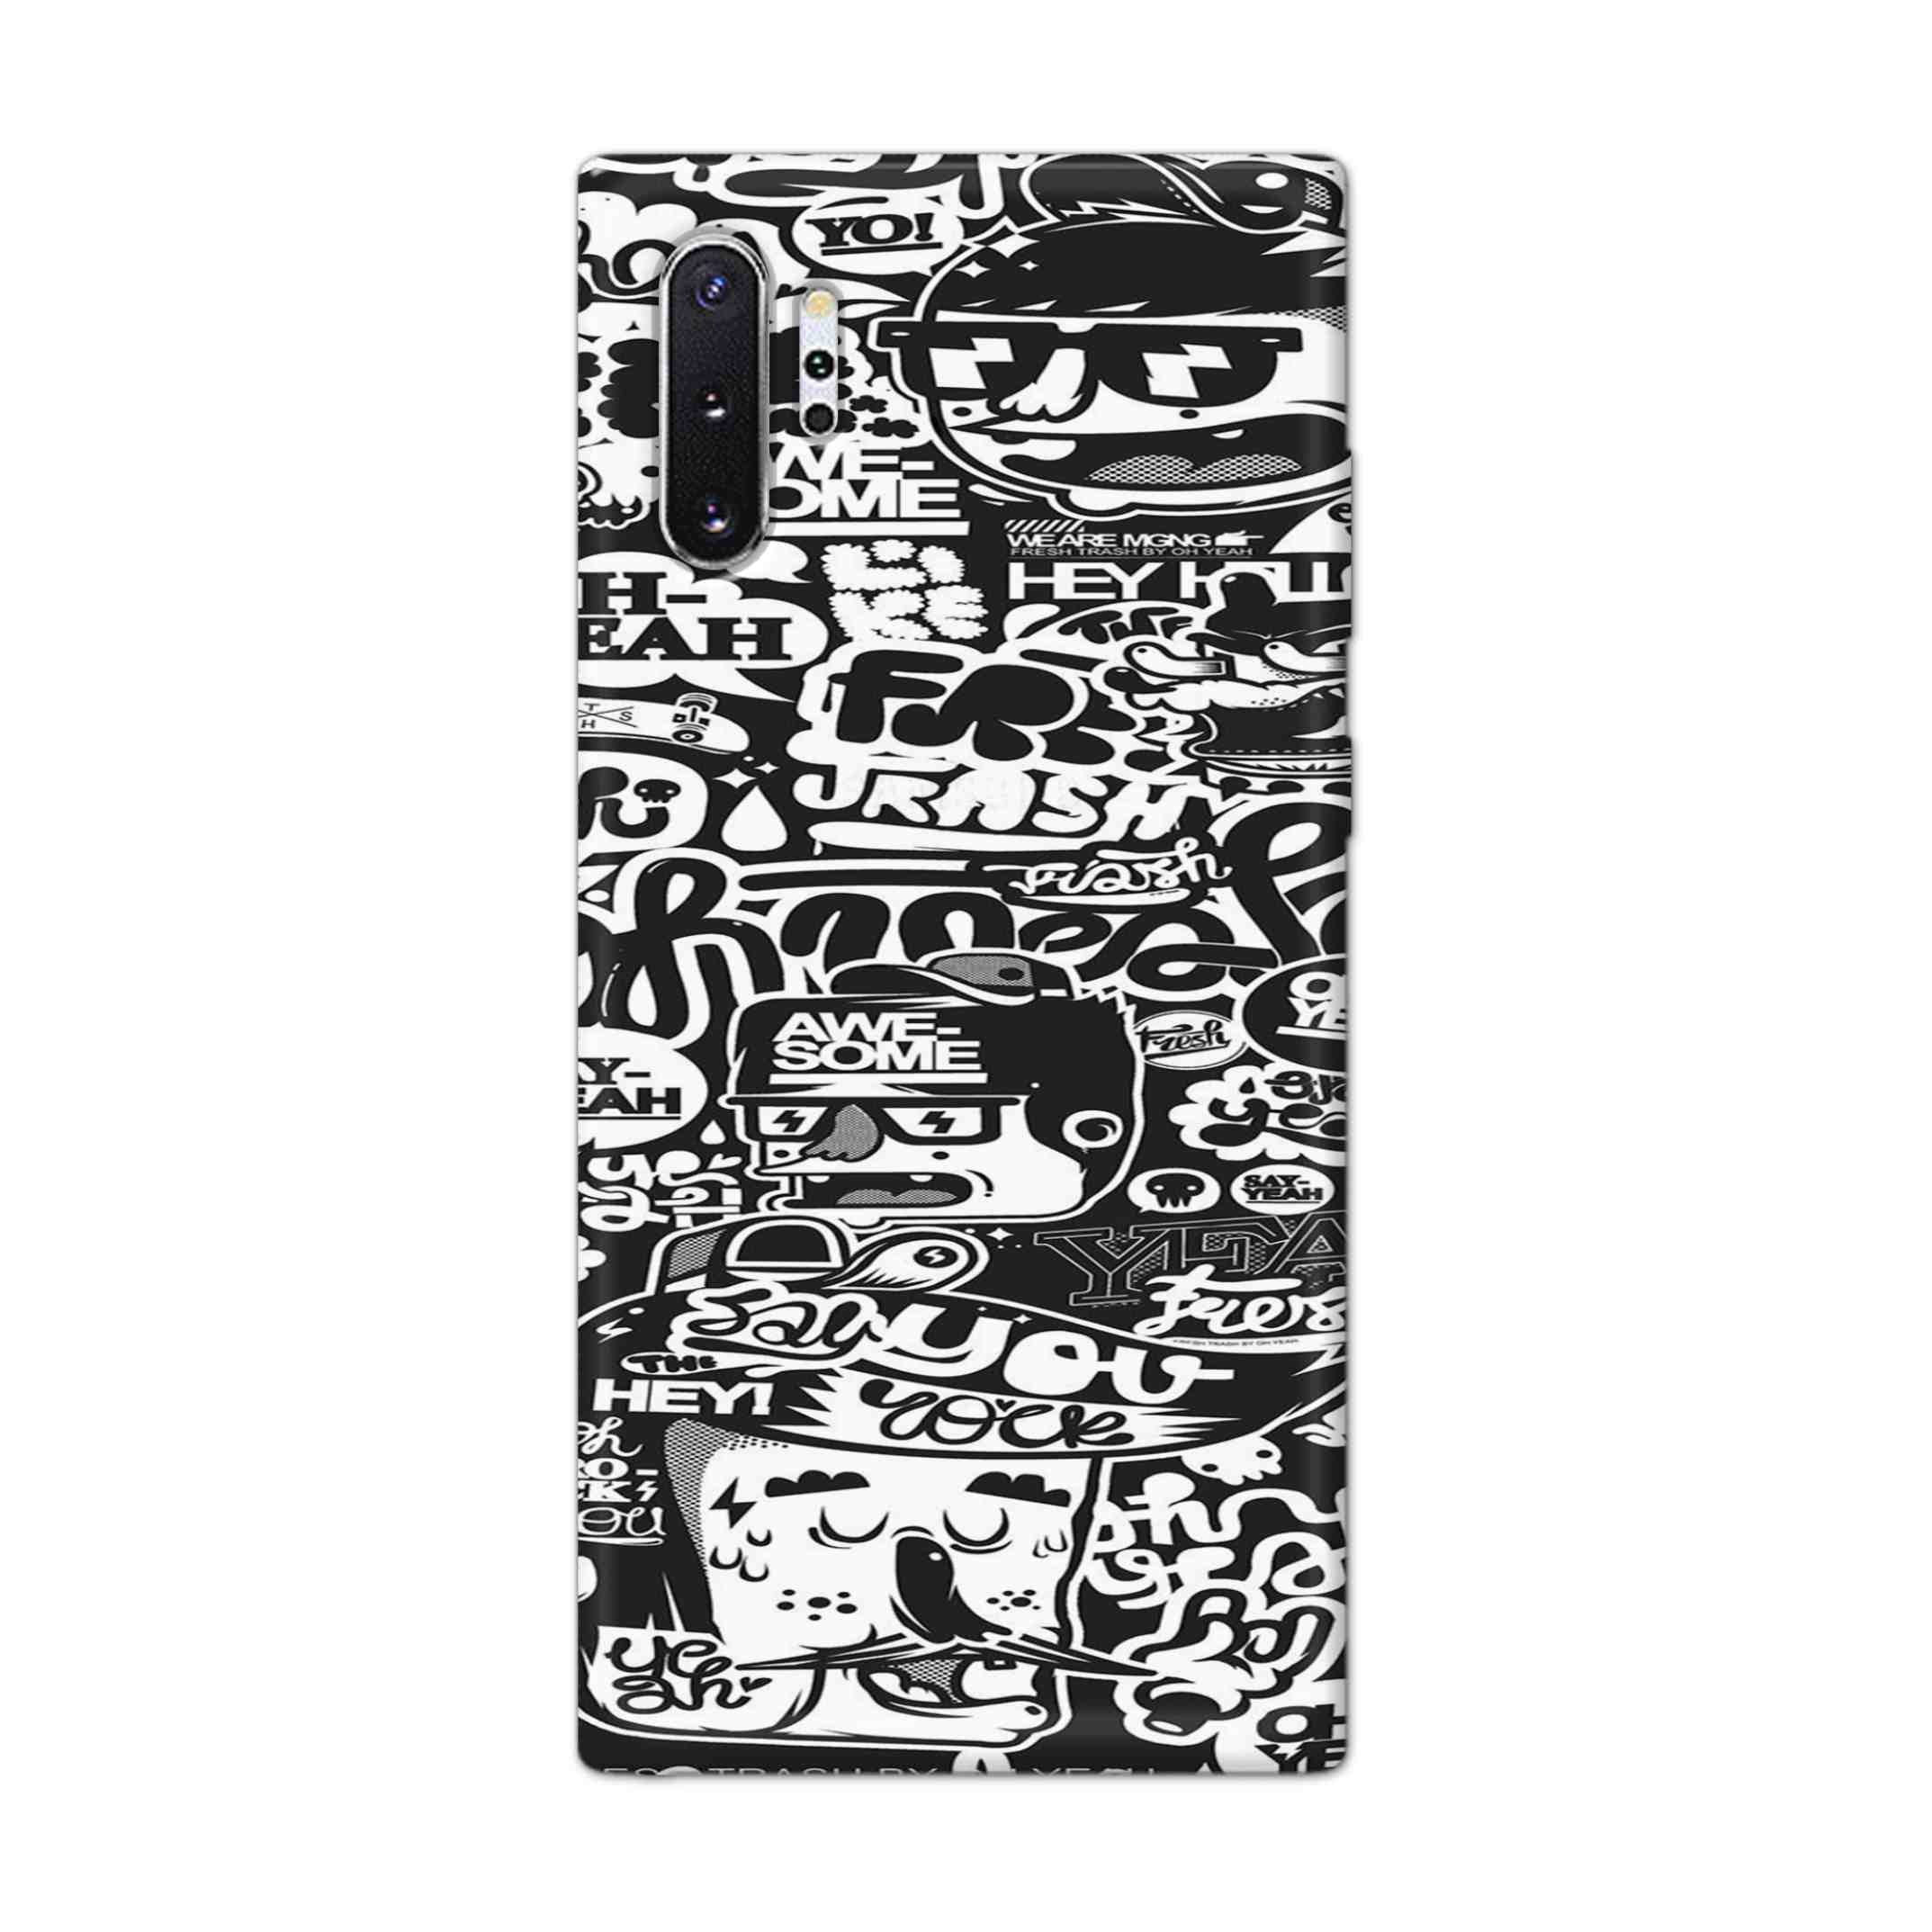 Buy Awesome Hard Back Mobile Phone Case Cover For Samsung Note 10 Plus (5G) Online